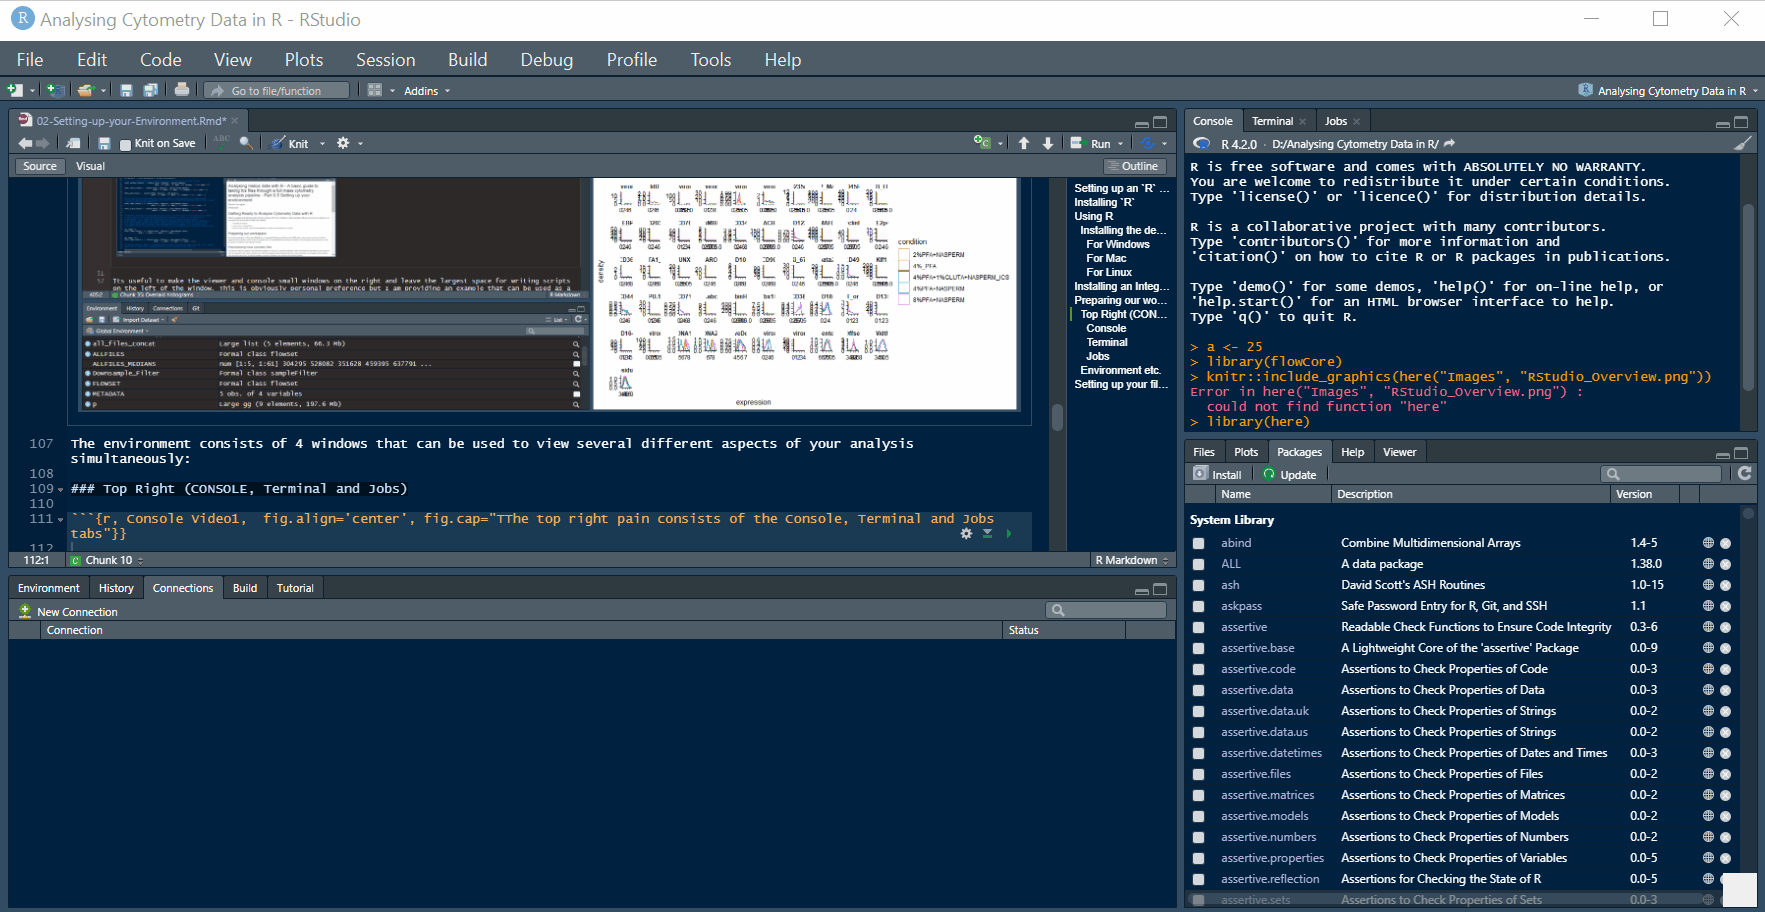 The top right pain consists of the Console, Terminal and Jobs tabs, echo = FALSE